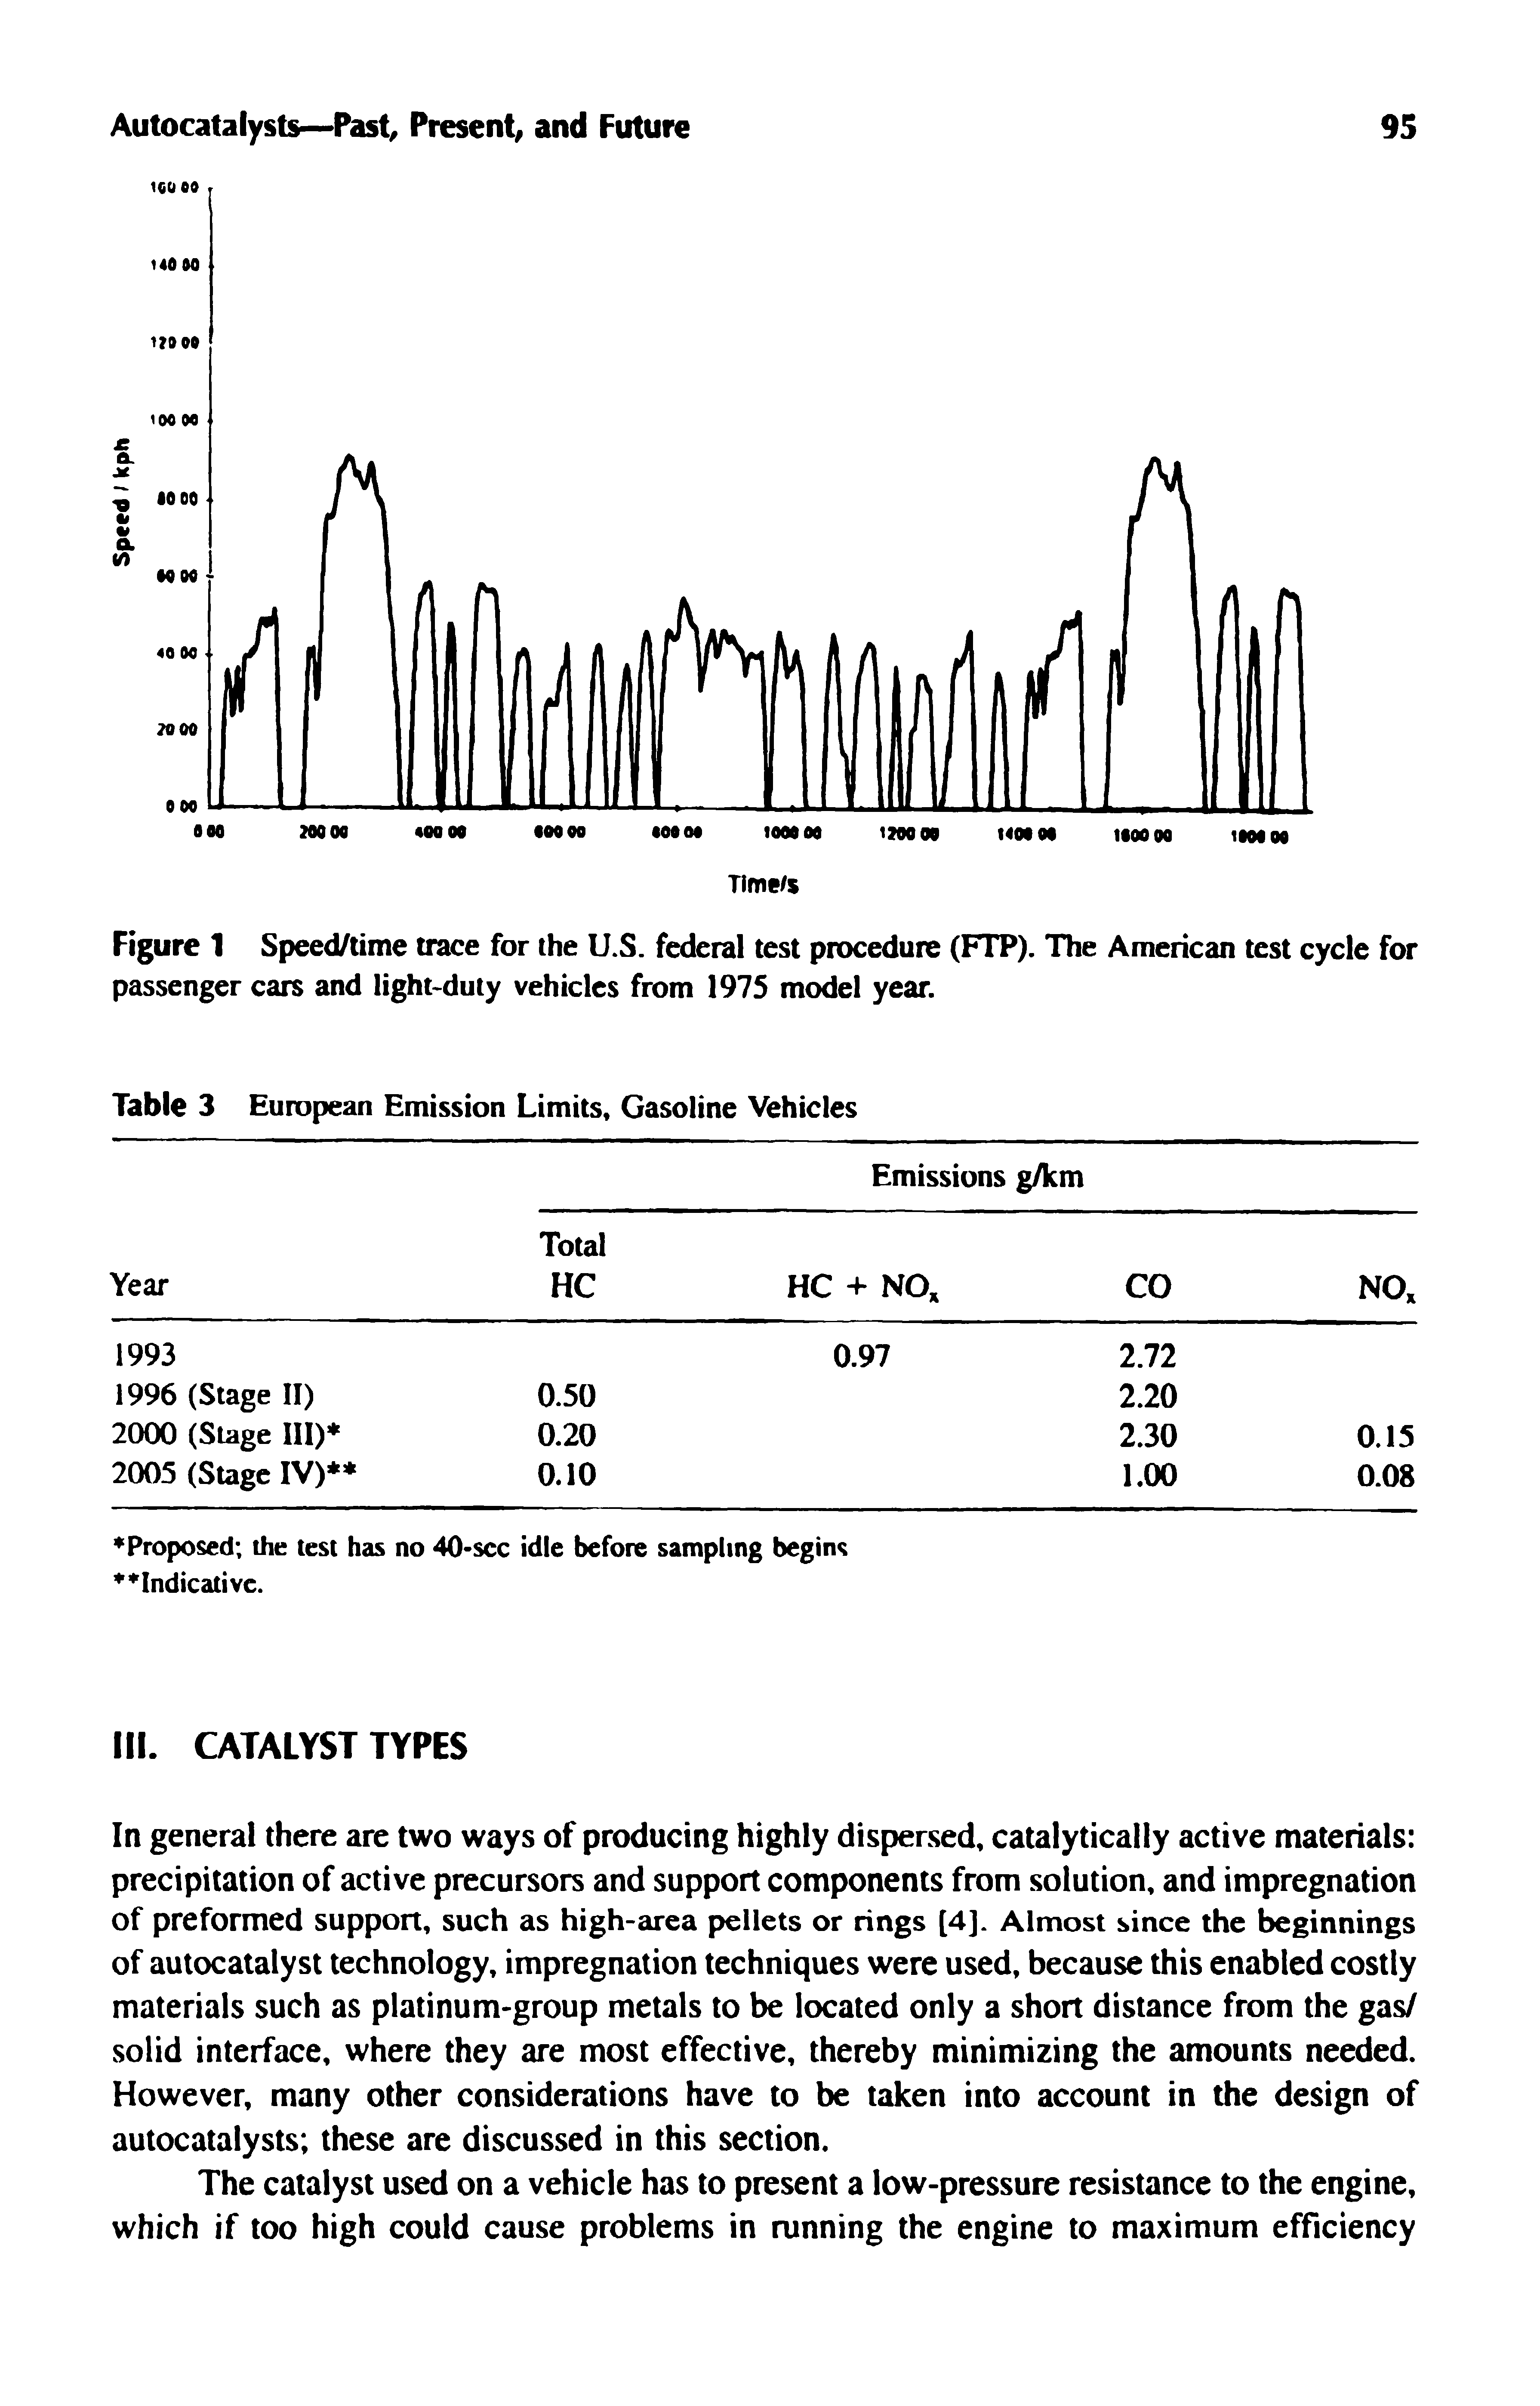 Figure 1 Speed/time trace for the U.S. federal test procedure (FTP). The American test cycle for passenger cars and light-duty vehicles from 1975 model year.